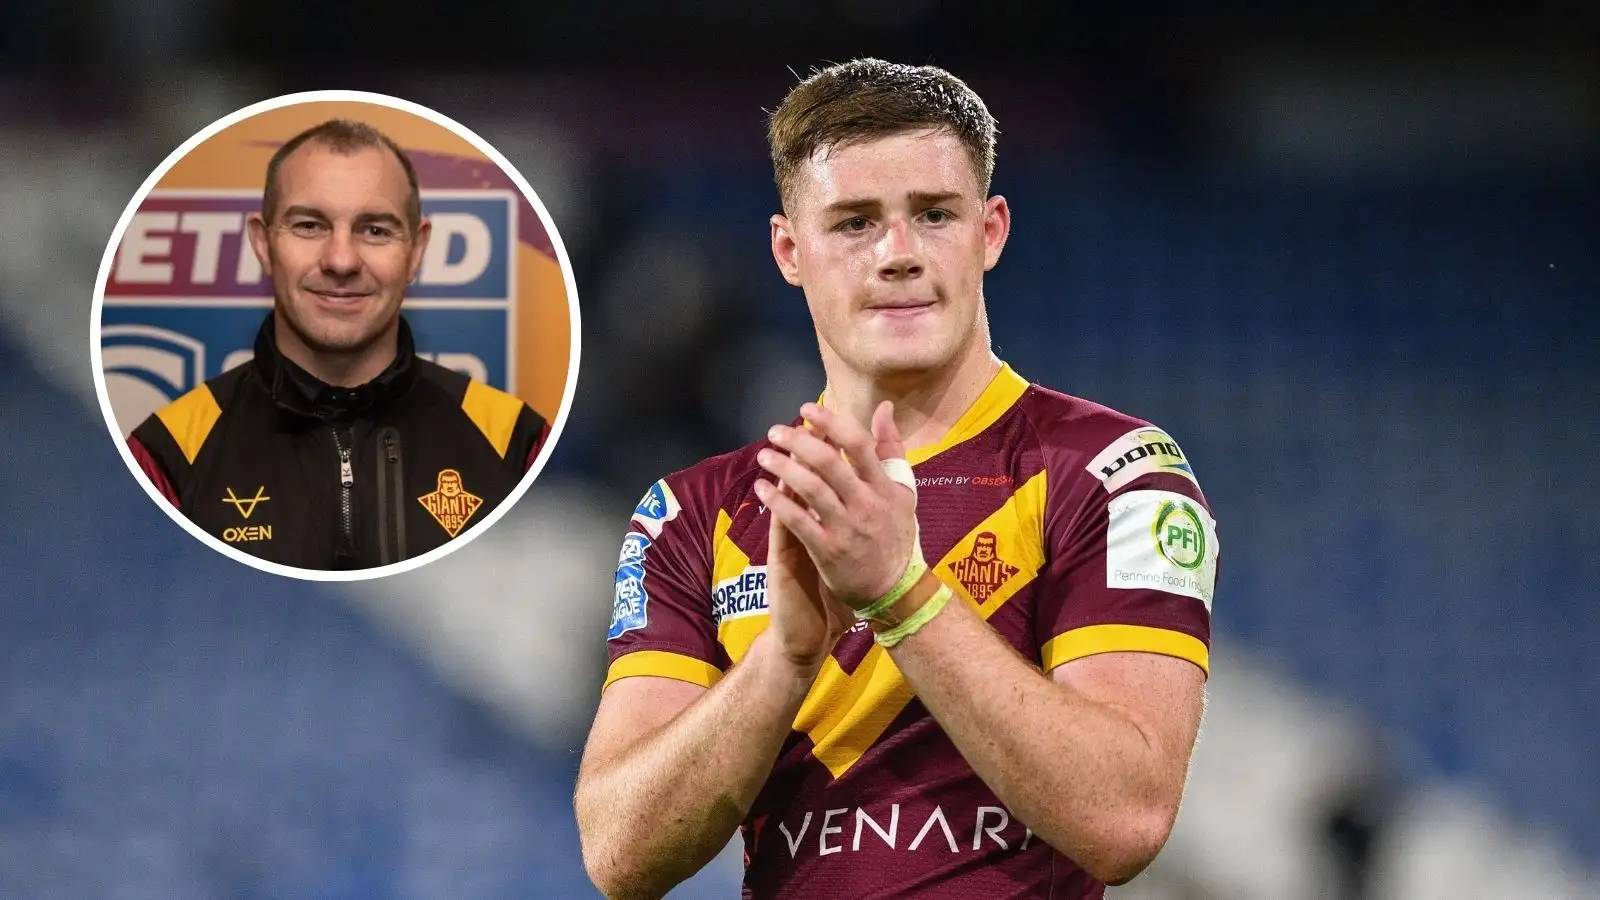 Huddersfield Giants young gun embracing Ian Watson’s dazzling praise: ‘I just want to prove him right’